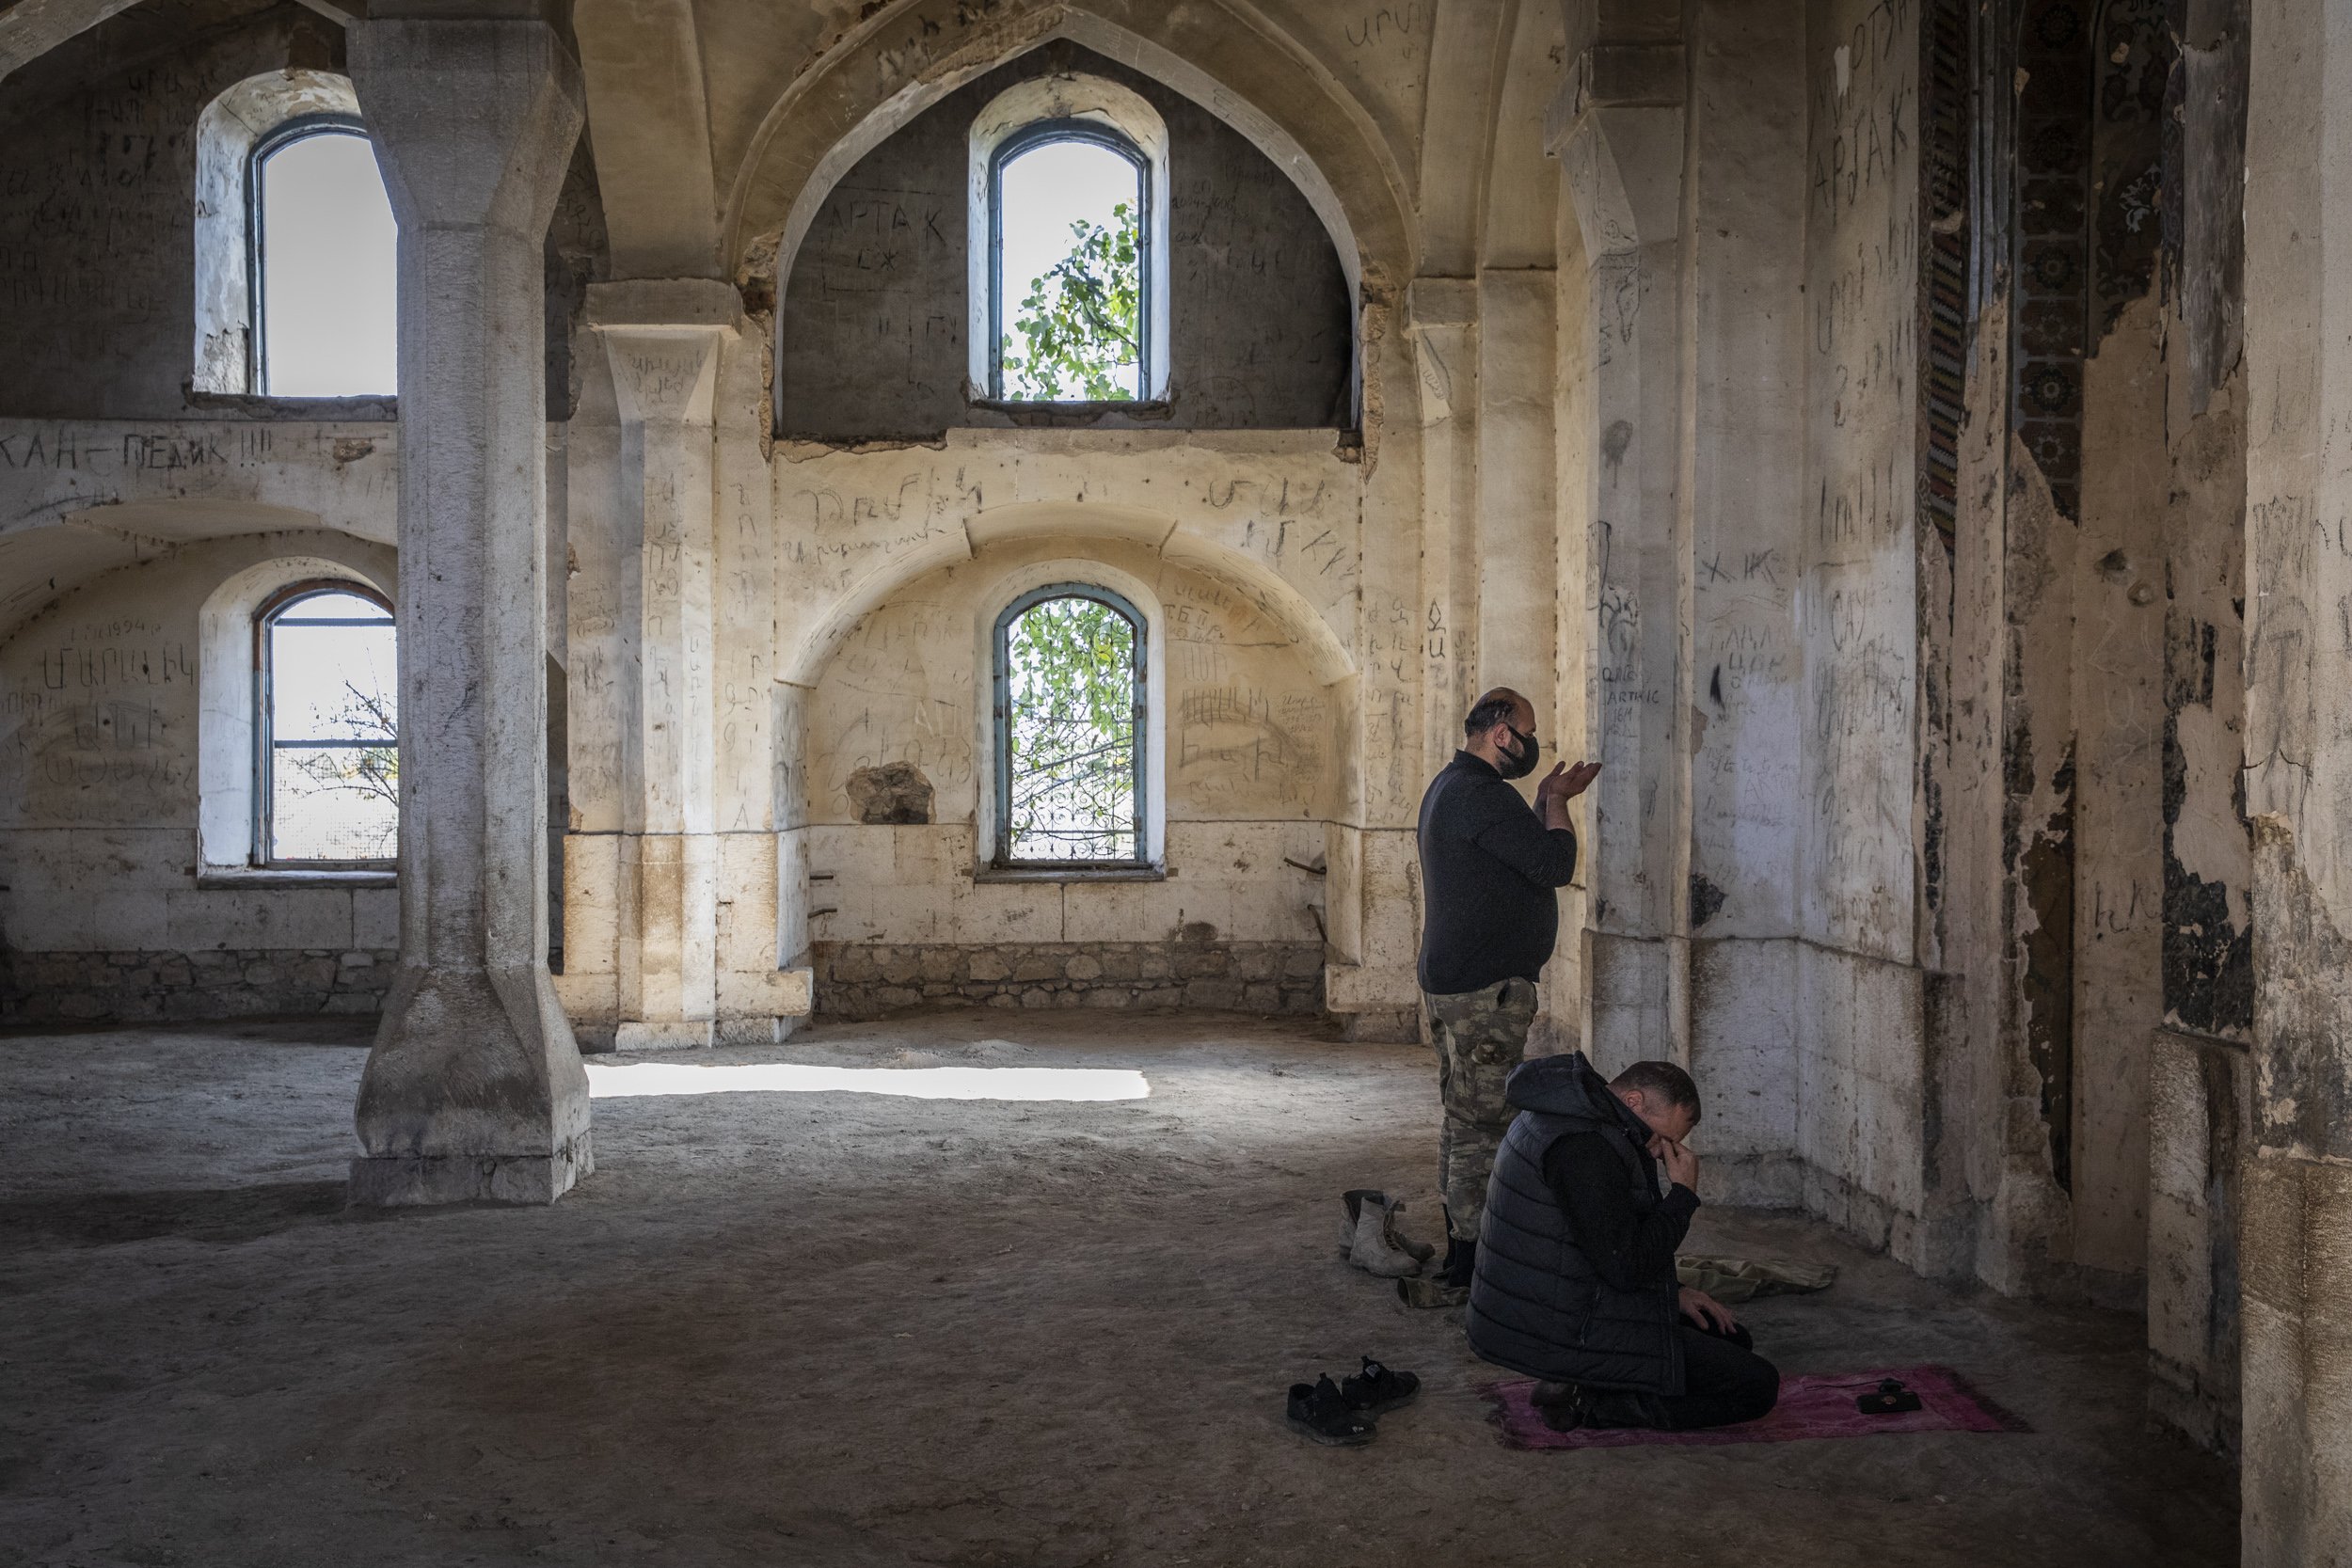  An Azerbaijani soldier and a man dressed in civilian clothing prayed at the mosque in Agdam city, which had been handed back to Azerbaijan after nearly 30 years of Armenian control. The mosque was reported to be the only structurally intact building